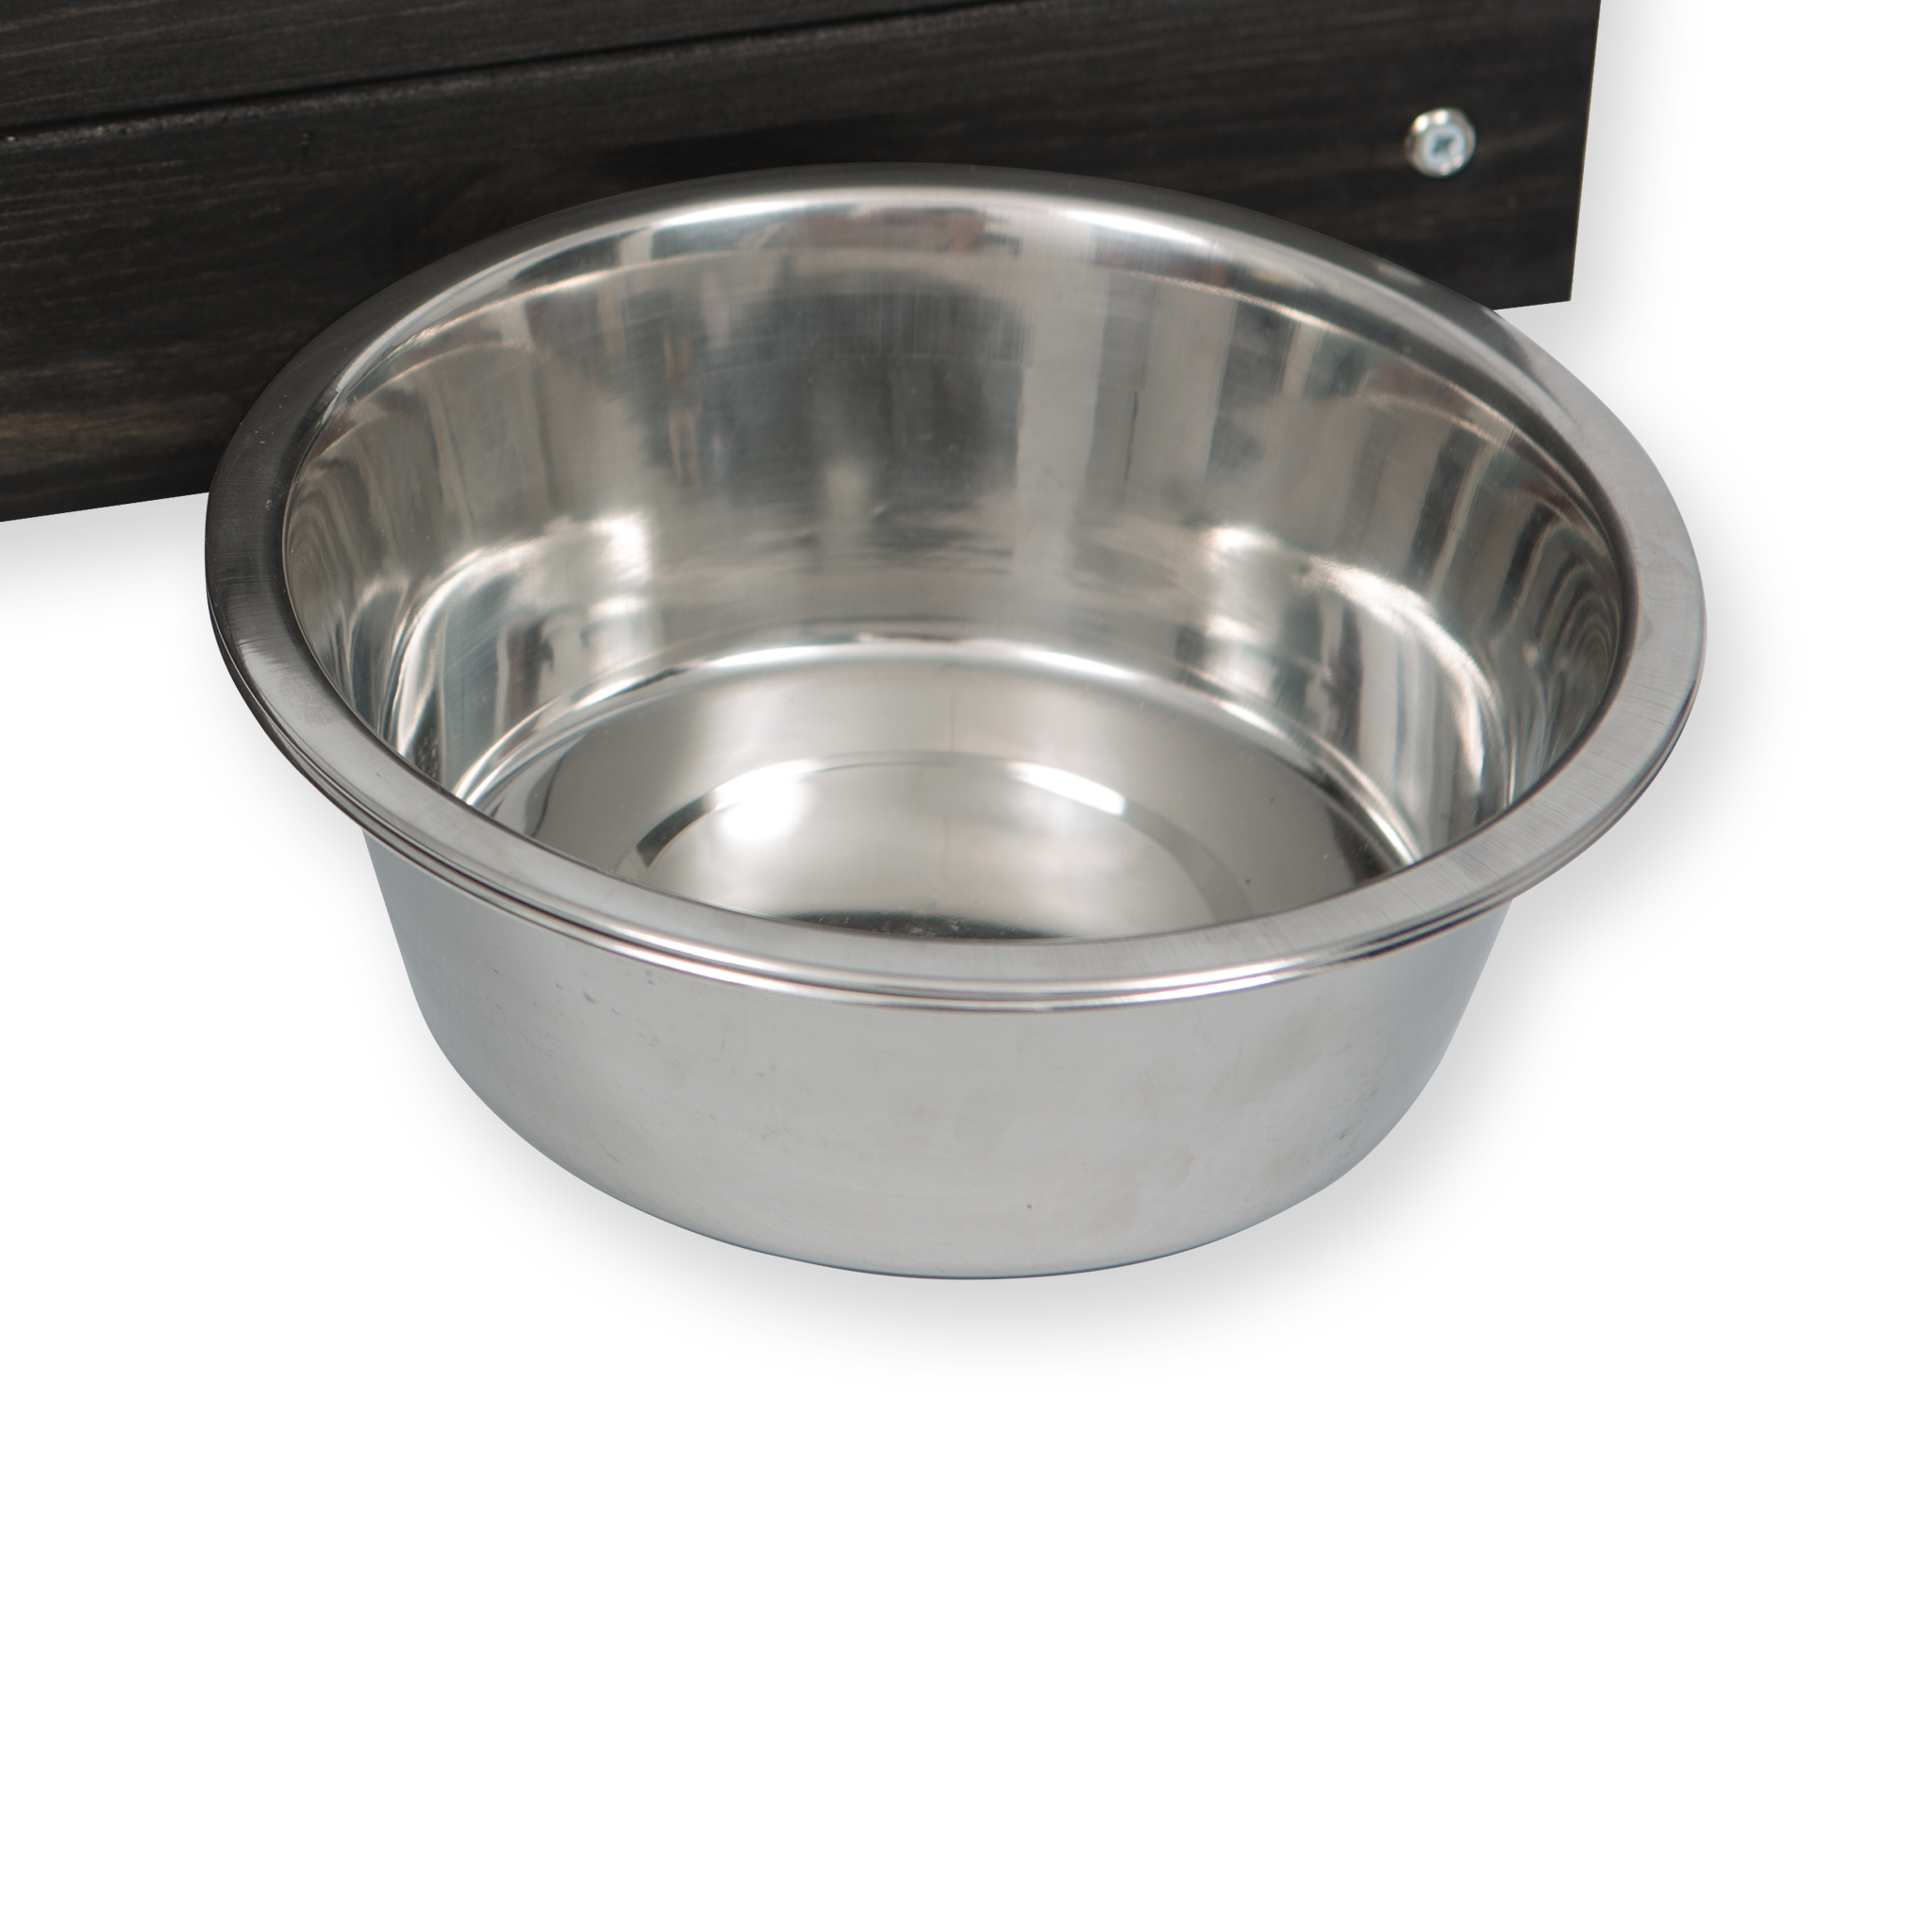 washable pet bowl, removable personalised bowl for easy washing